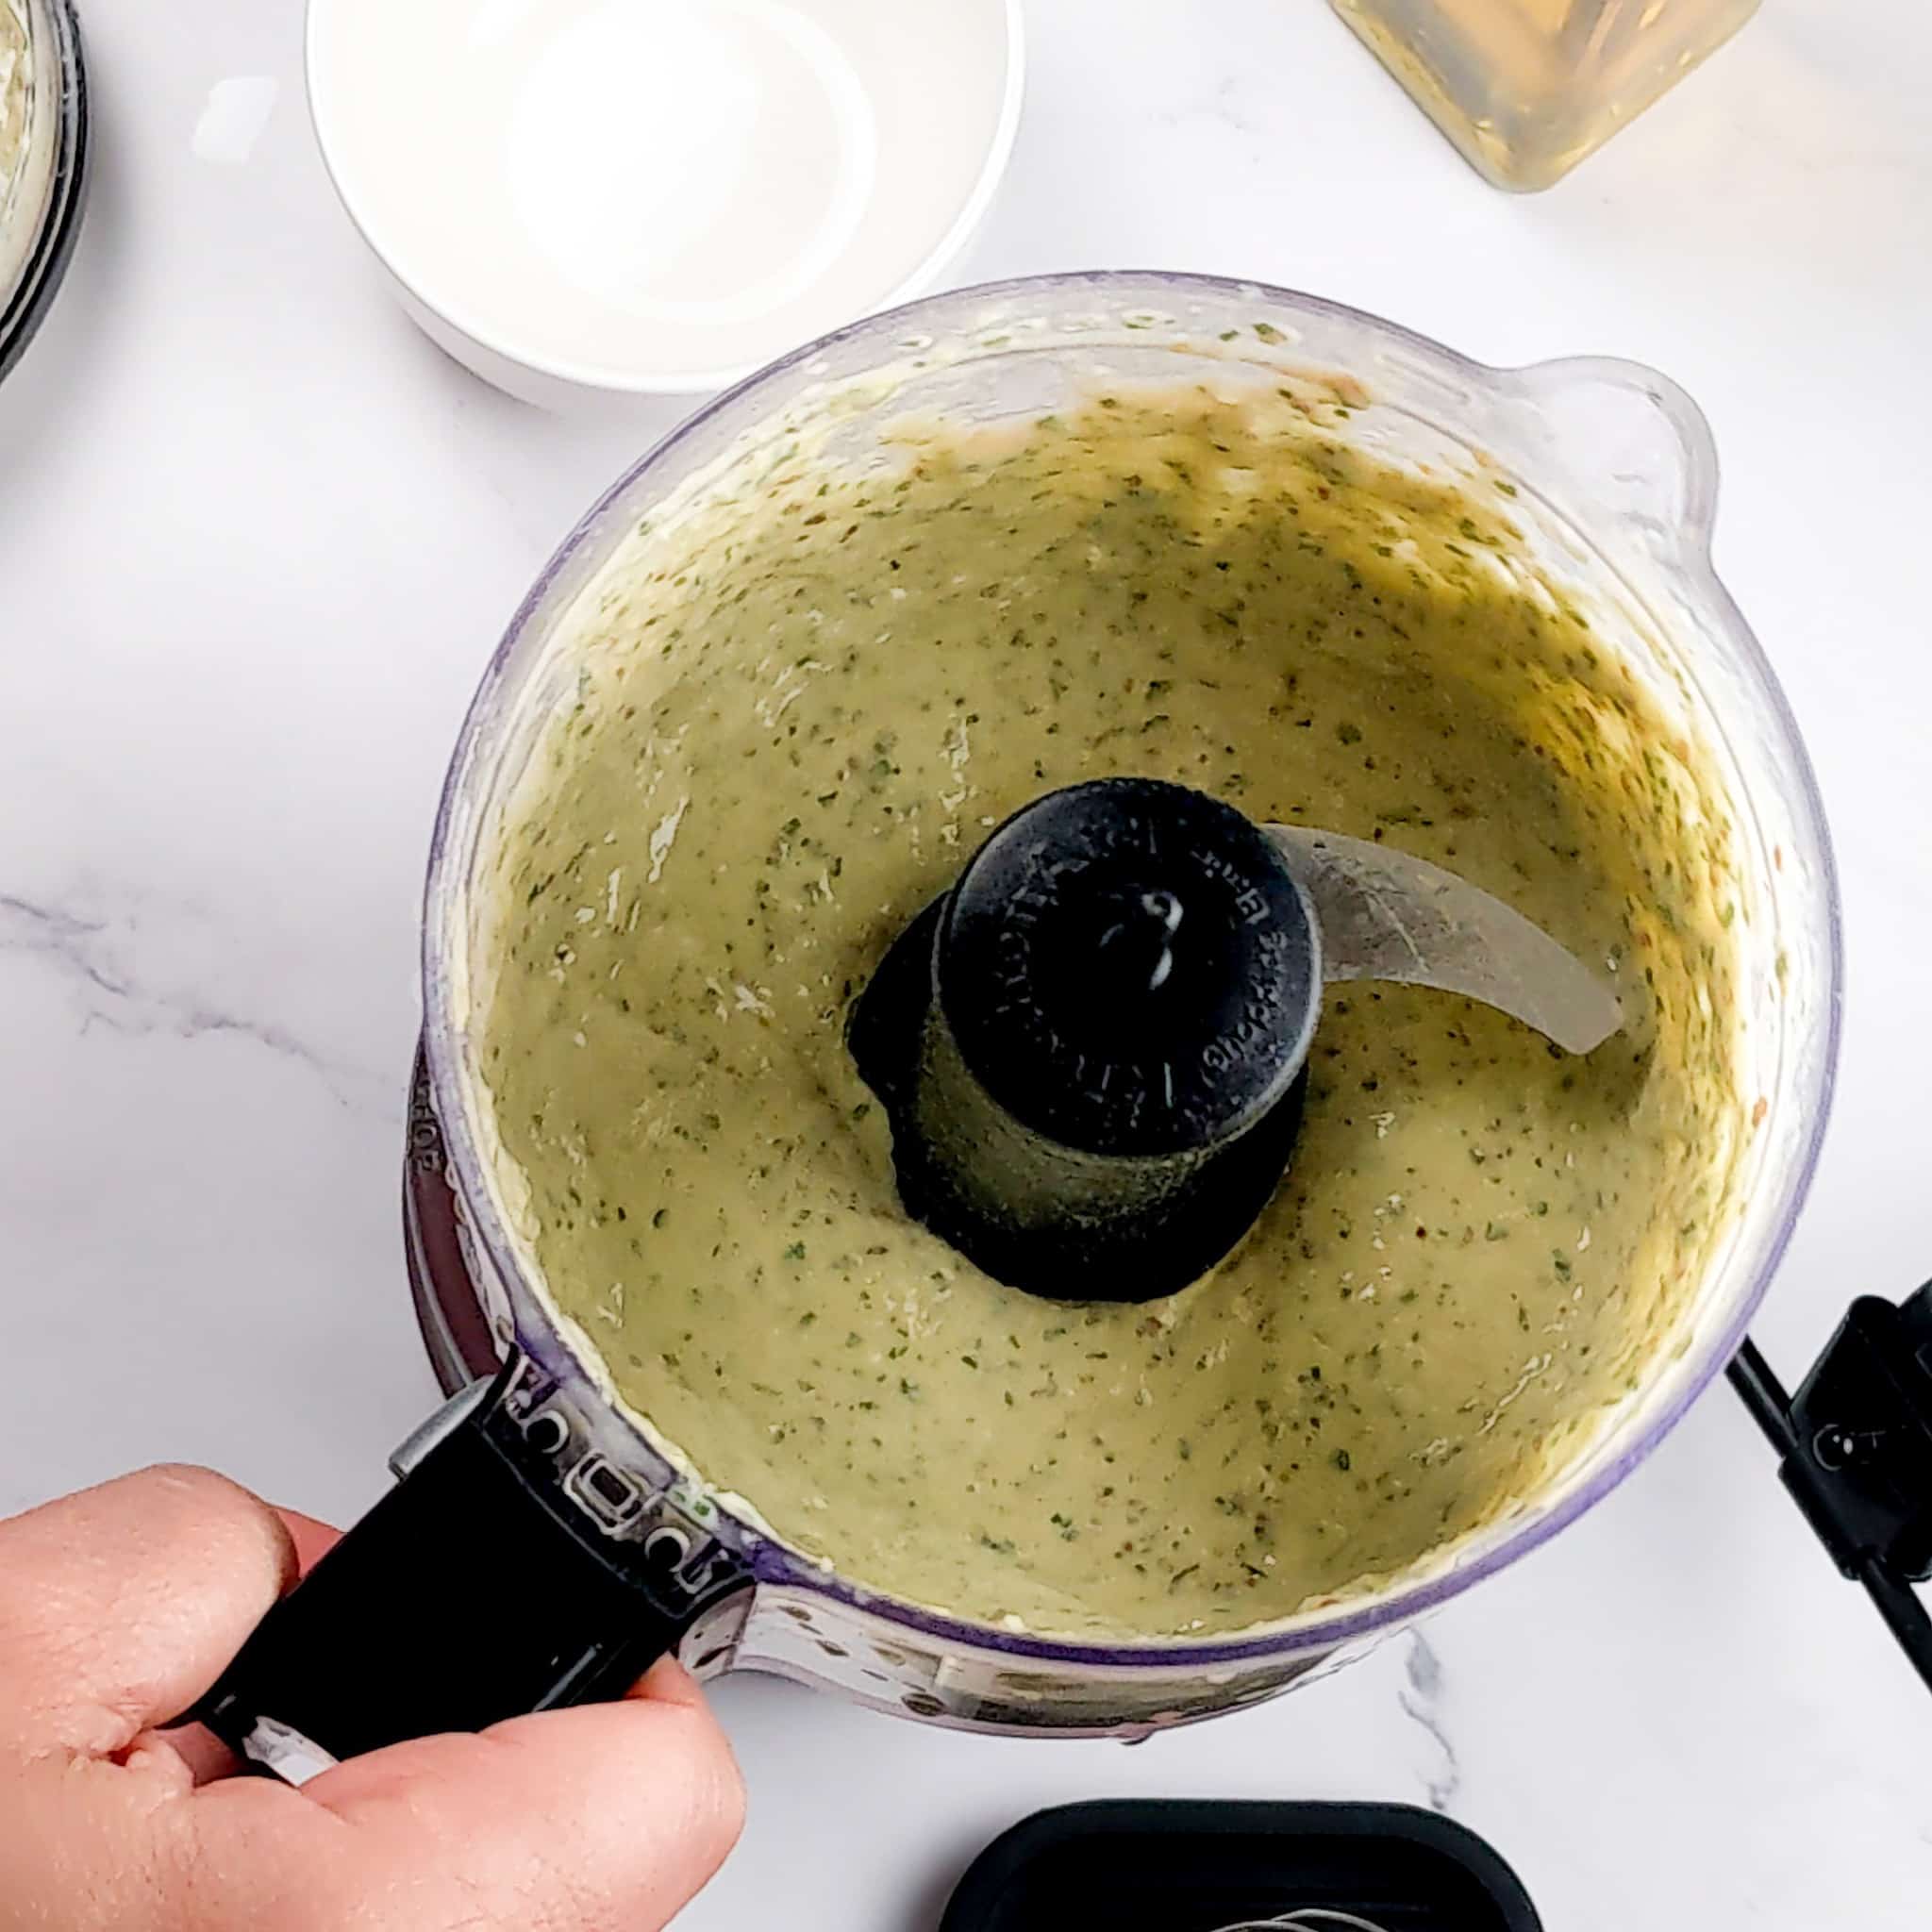 Tahini dressing in a food processor container